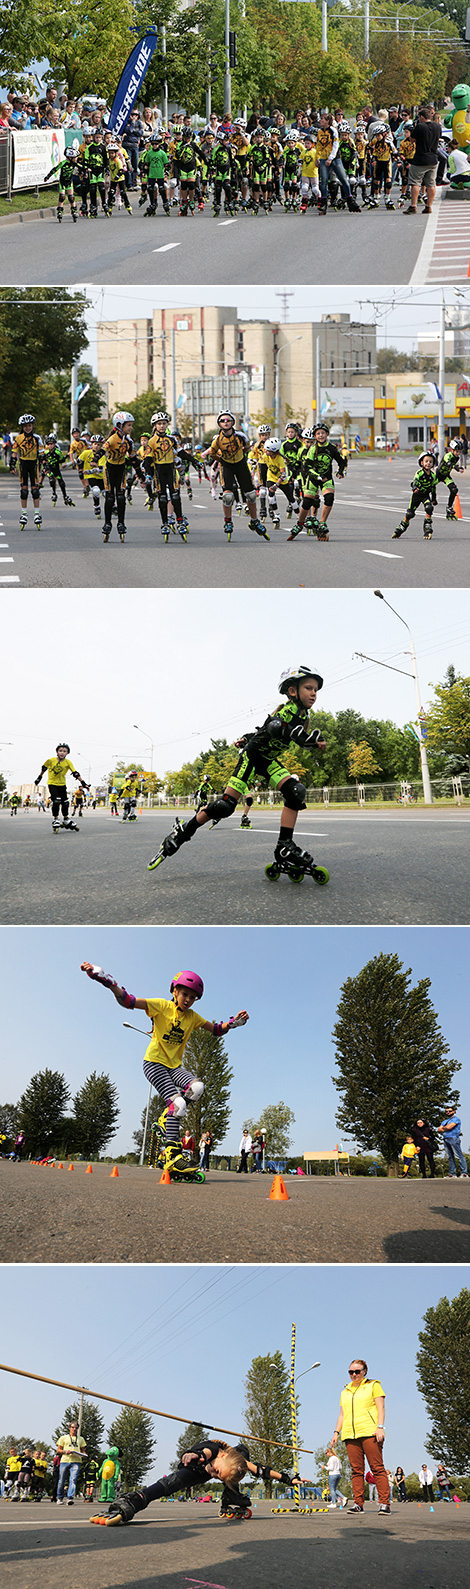 Youth subcultures and competitions: an international roller marathon in Minsk